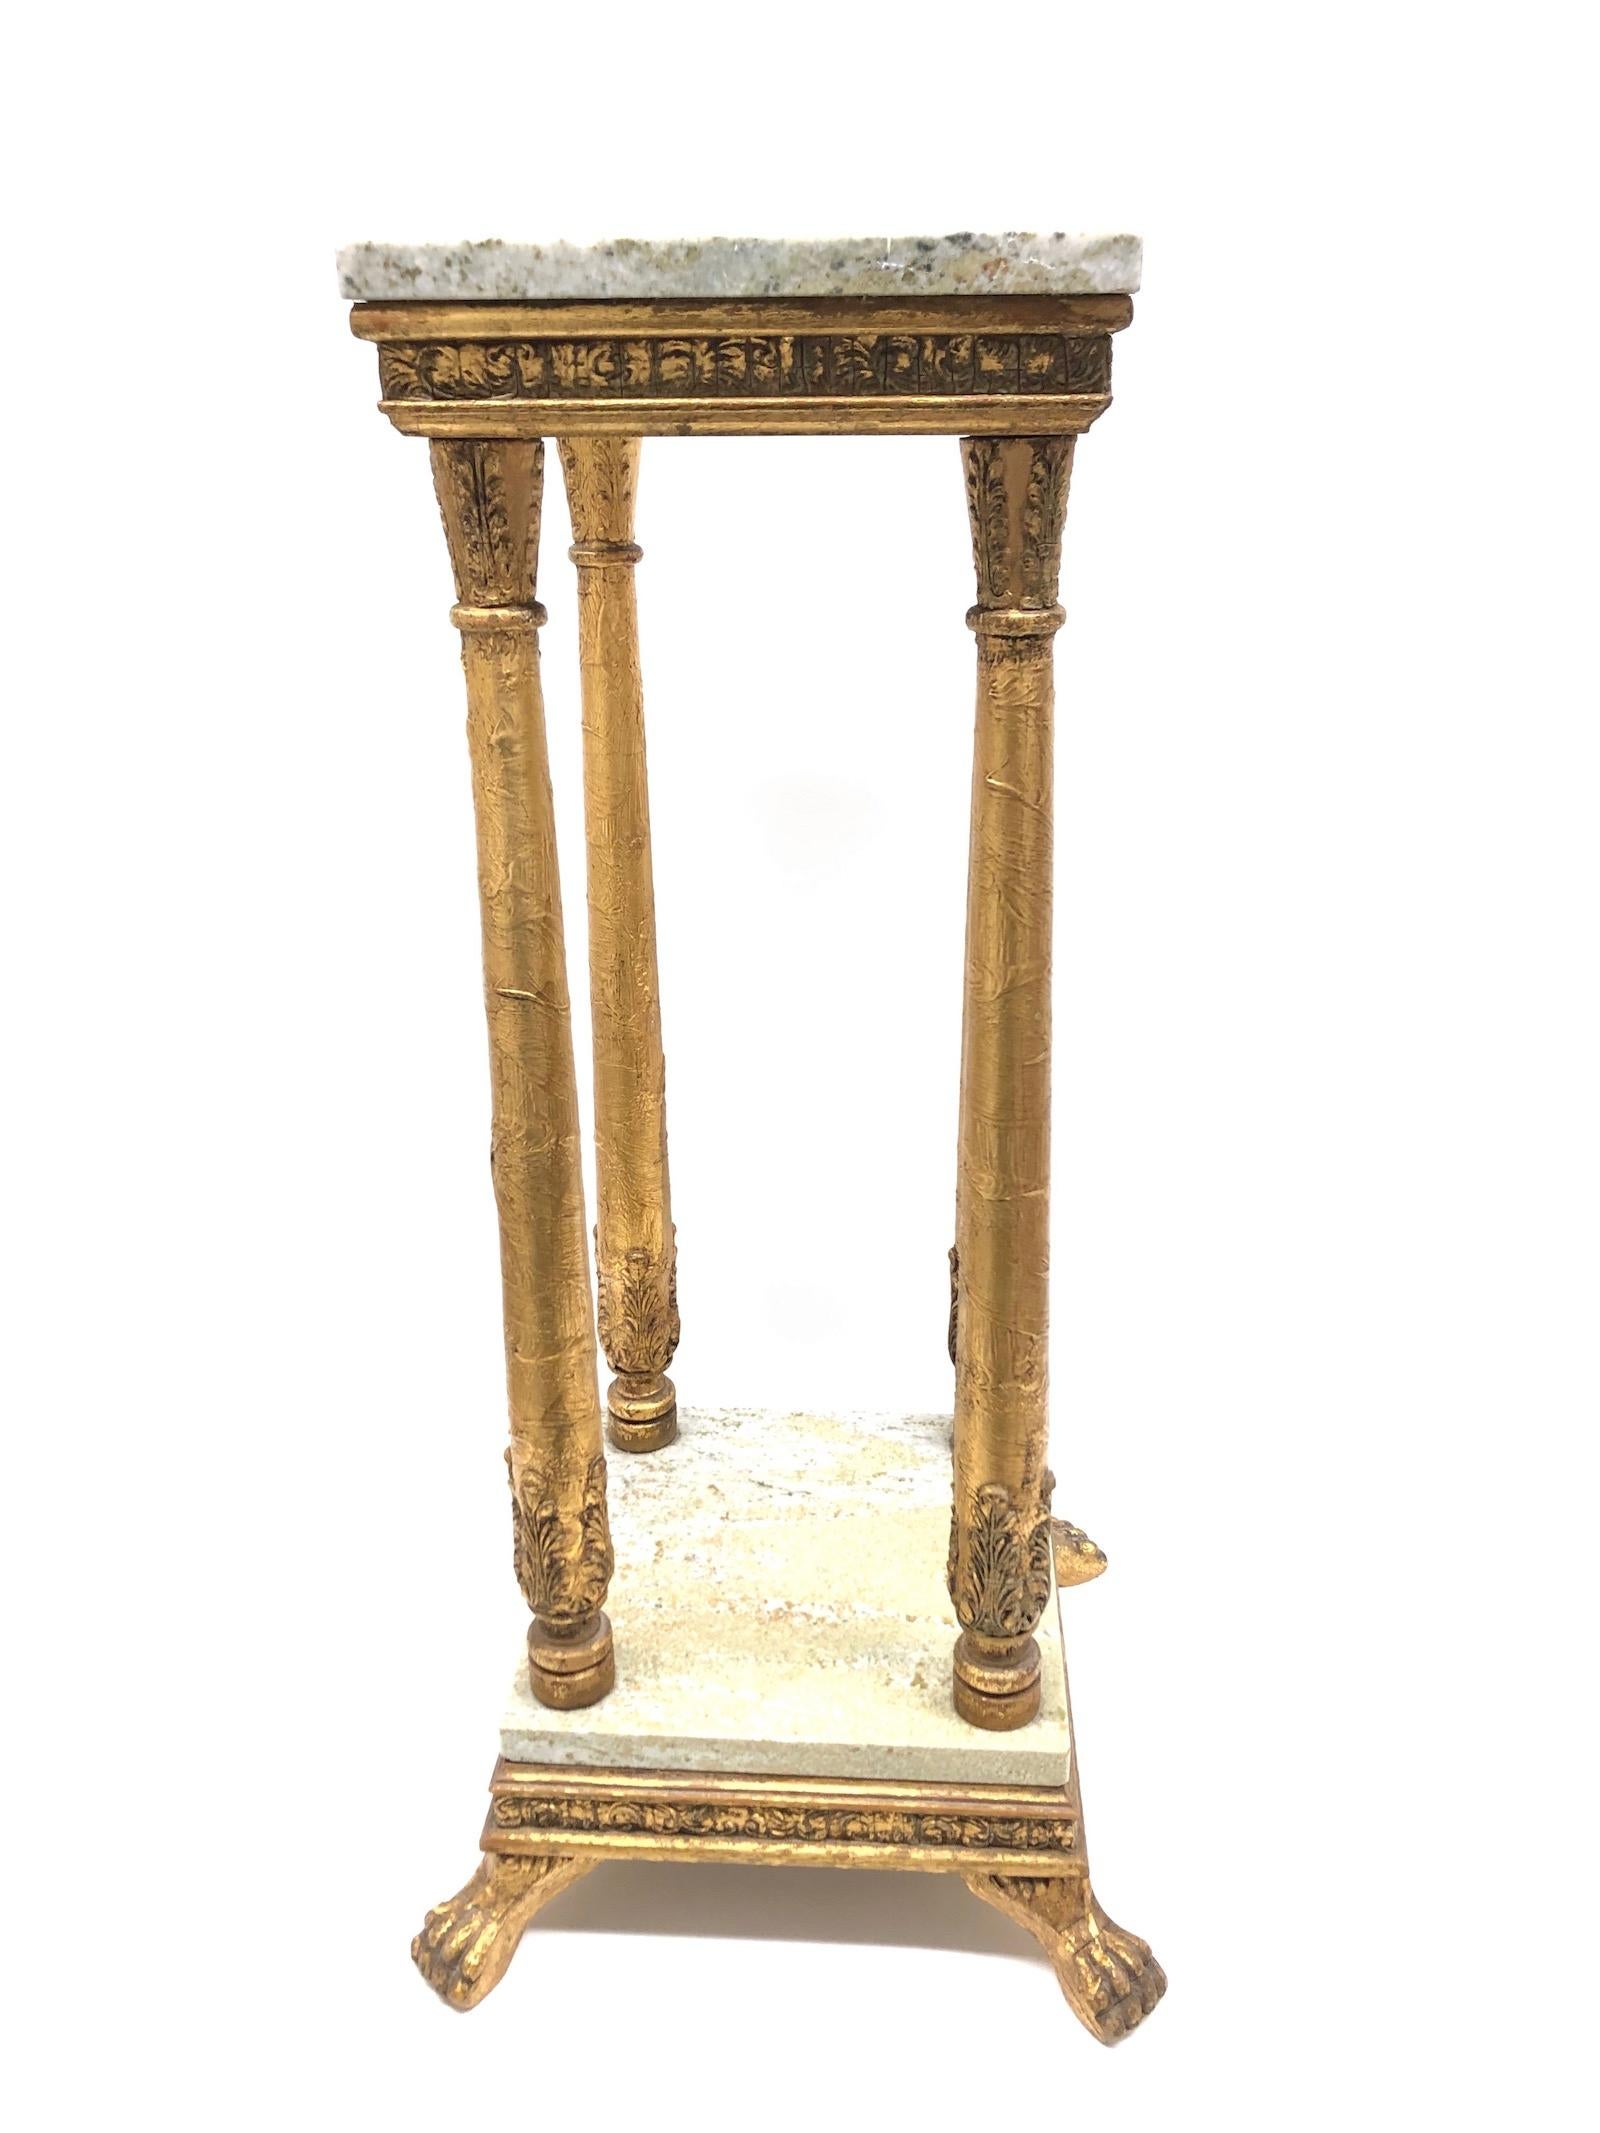 A good quality late 19th century giltwood, marble topped console table pedestal in the Louis XVI style. It has carved wood and plaster work decoration to the legs and around the rim at the wood under the marble plates. Feet are made in the style of